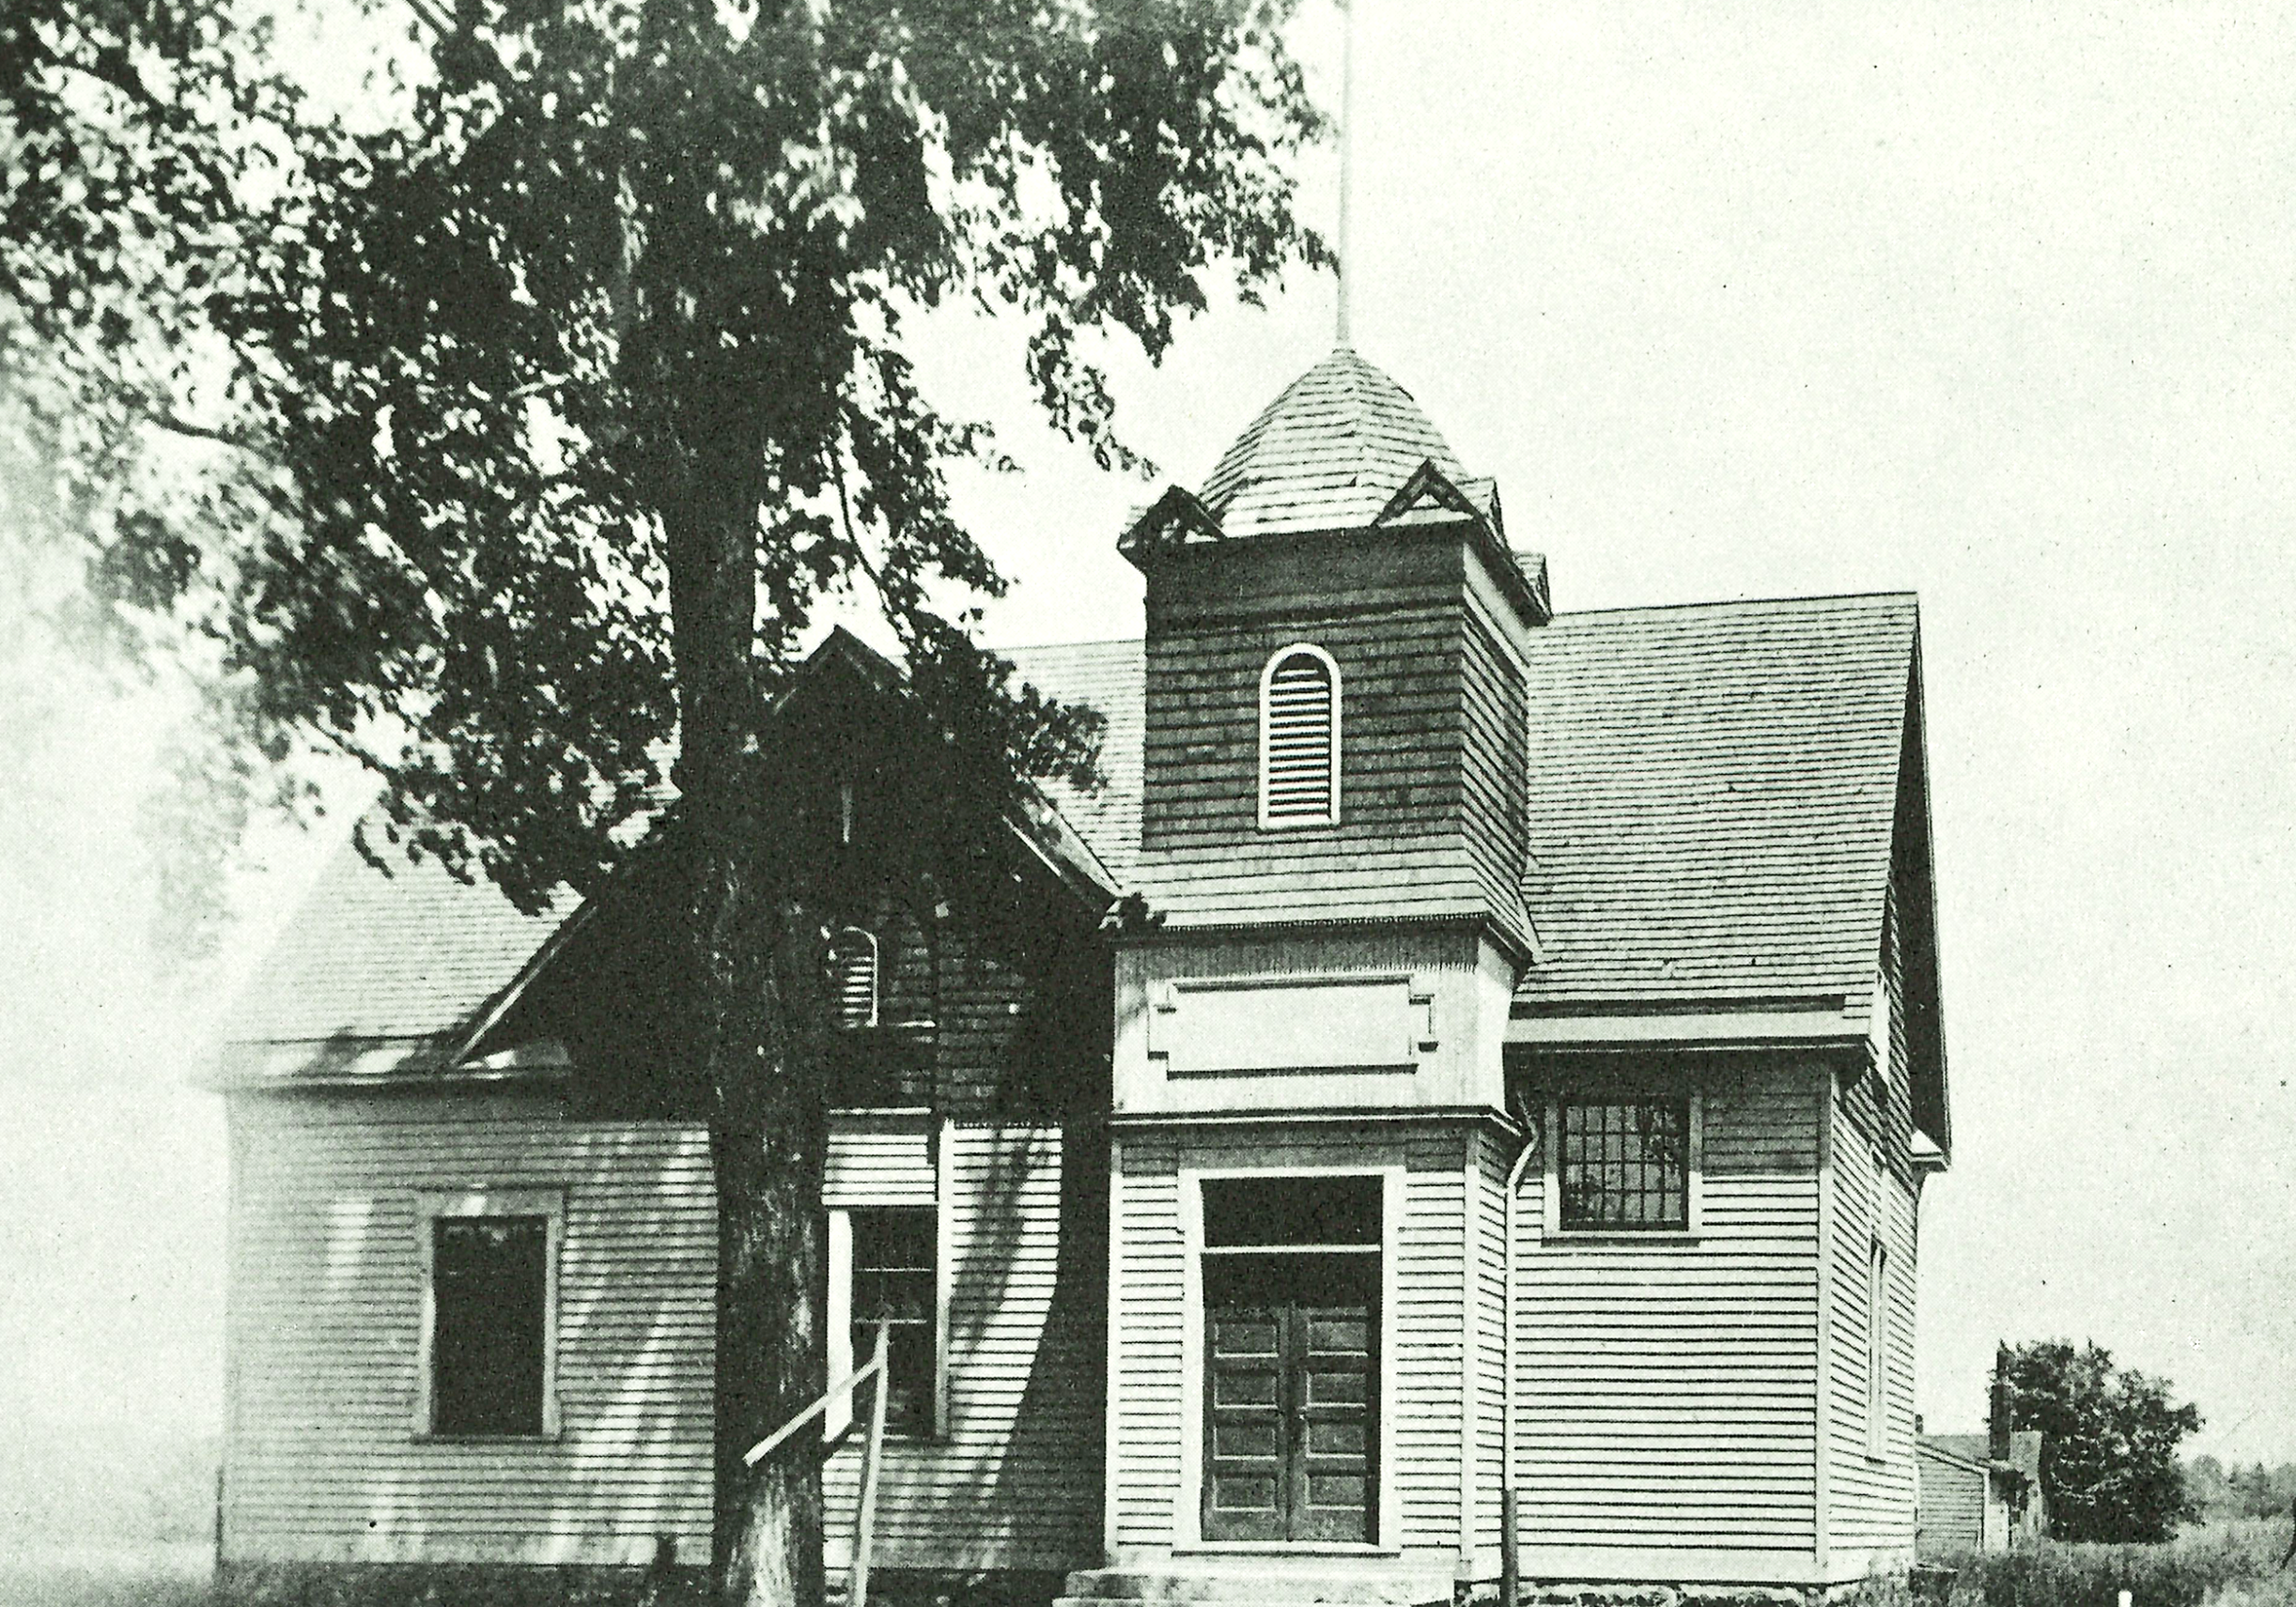 Exterior black and white photograph of the former City of South Euclid town hall. The building sits behind a large tree.